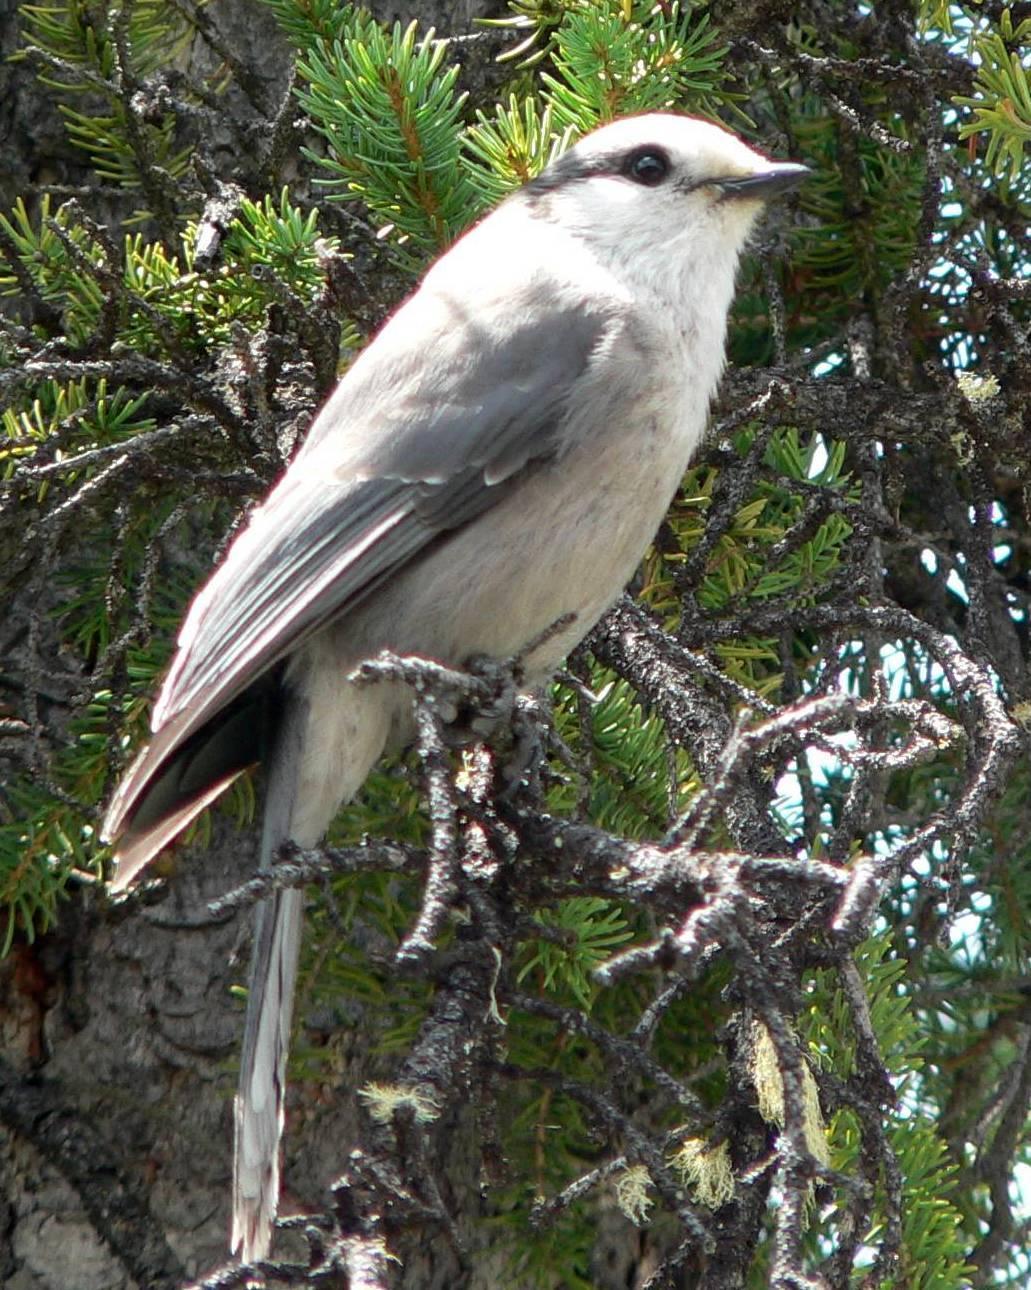 Canada Jay Photo by Peter Lowe